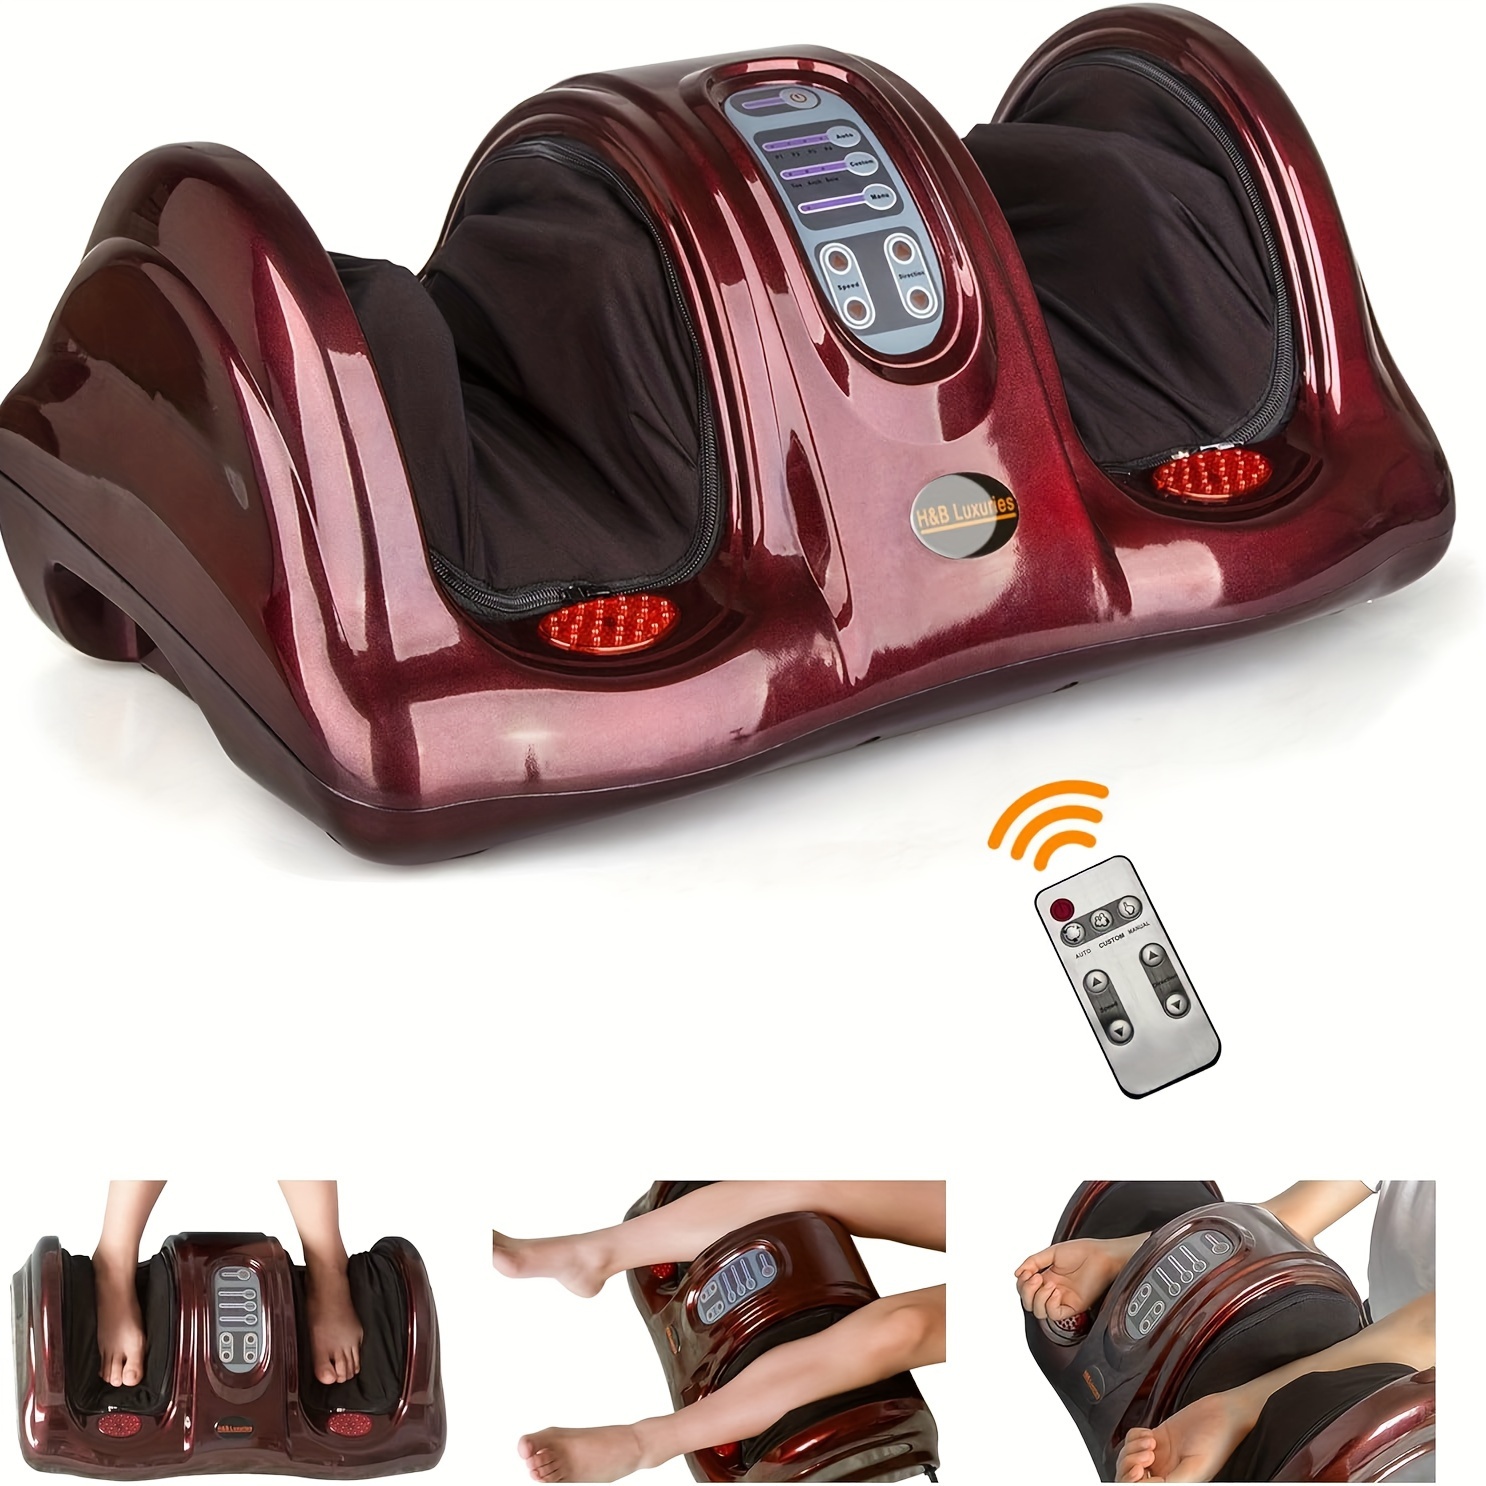 

Shiatsu Foot Massager Machine With Remote Controller, Kneading And Massagers For Feet, Ankle, Calf, Leg, Gift For Men, Women, Father, Mom Parents And The Elderly, Red